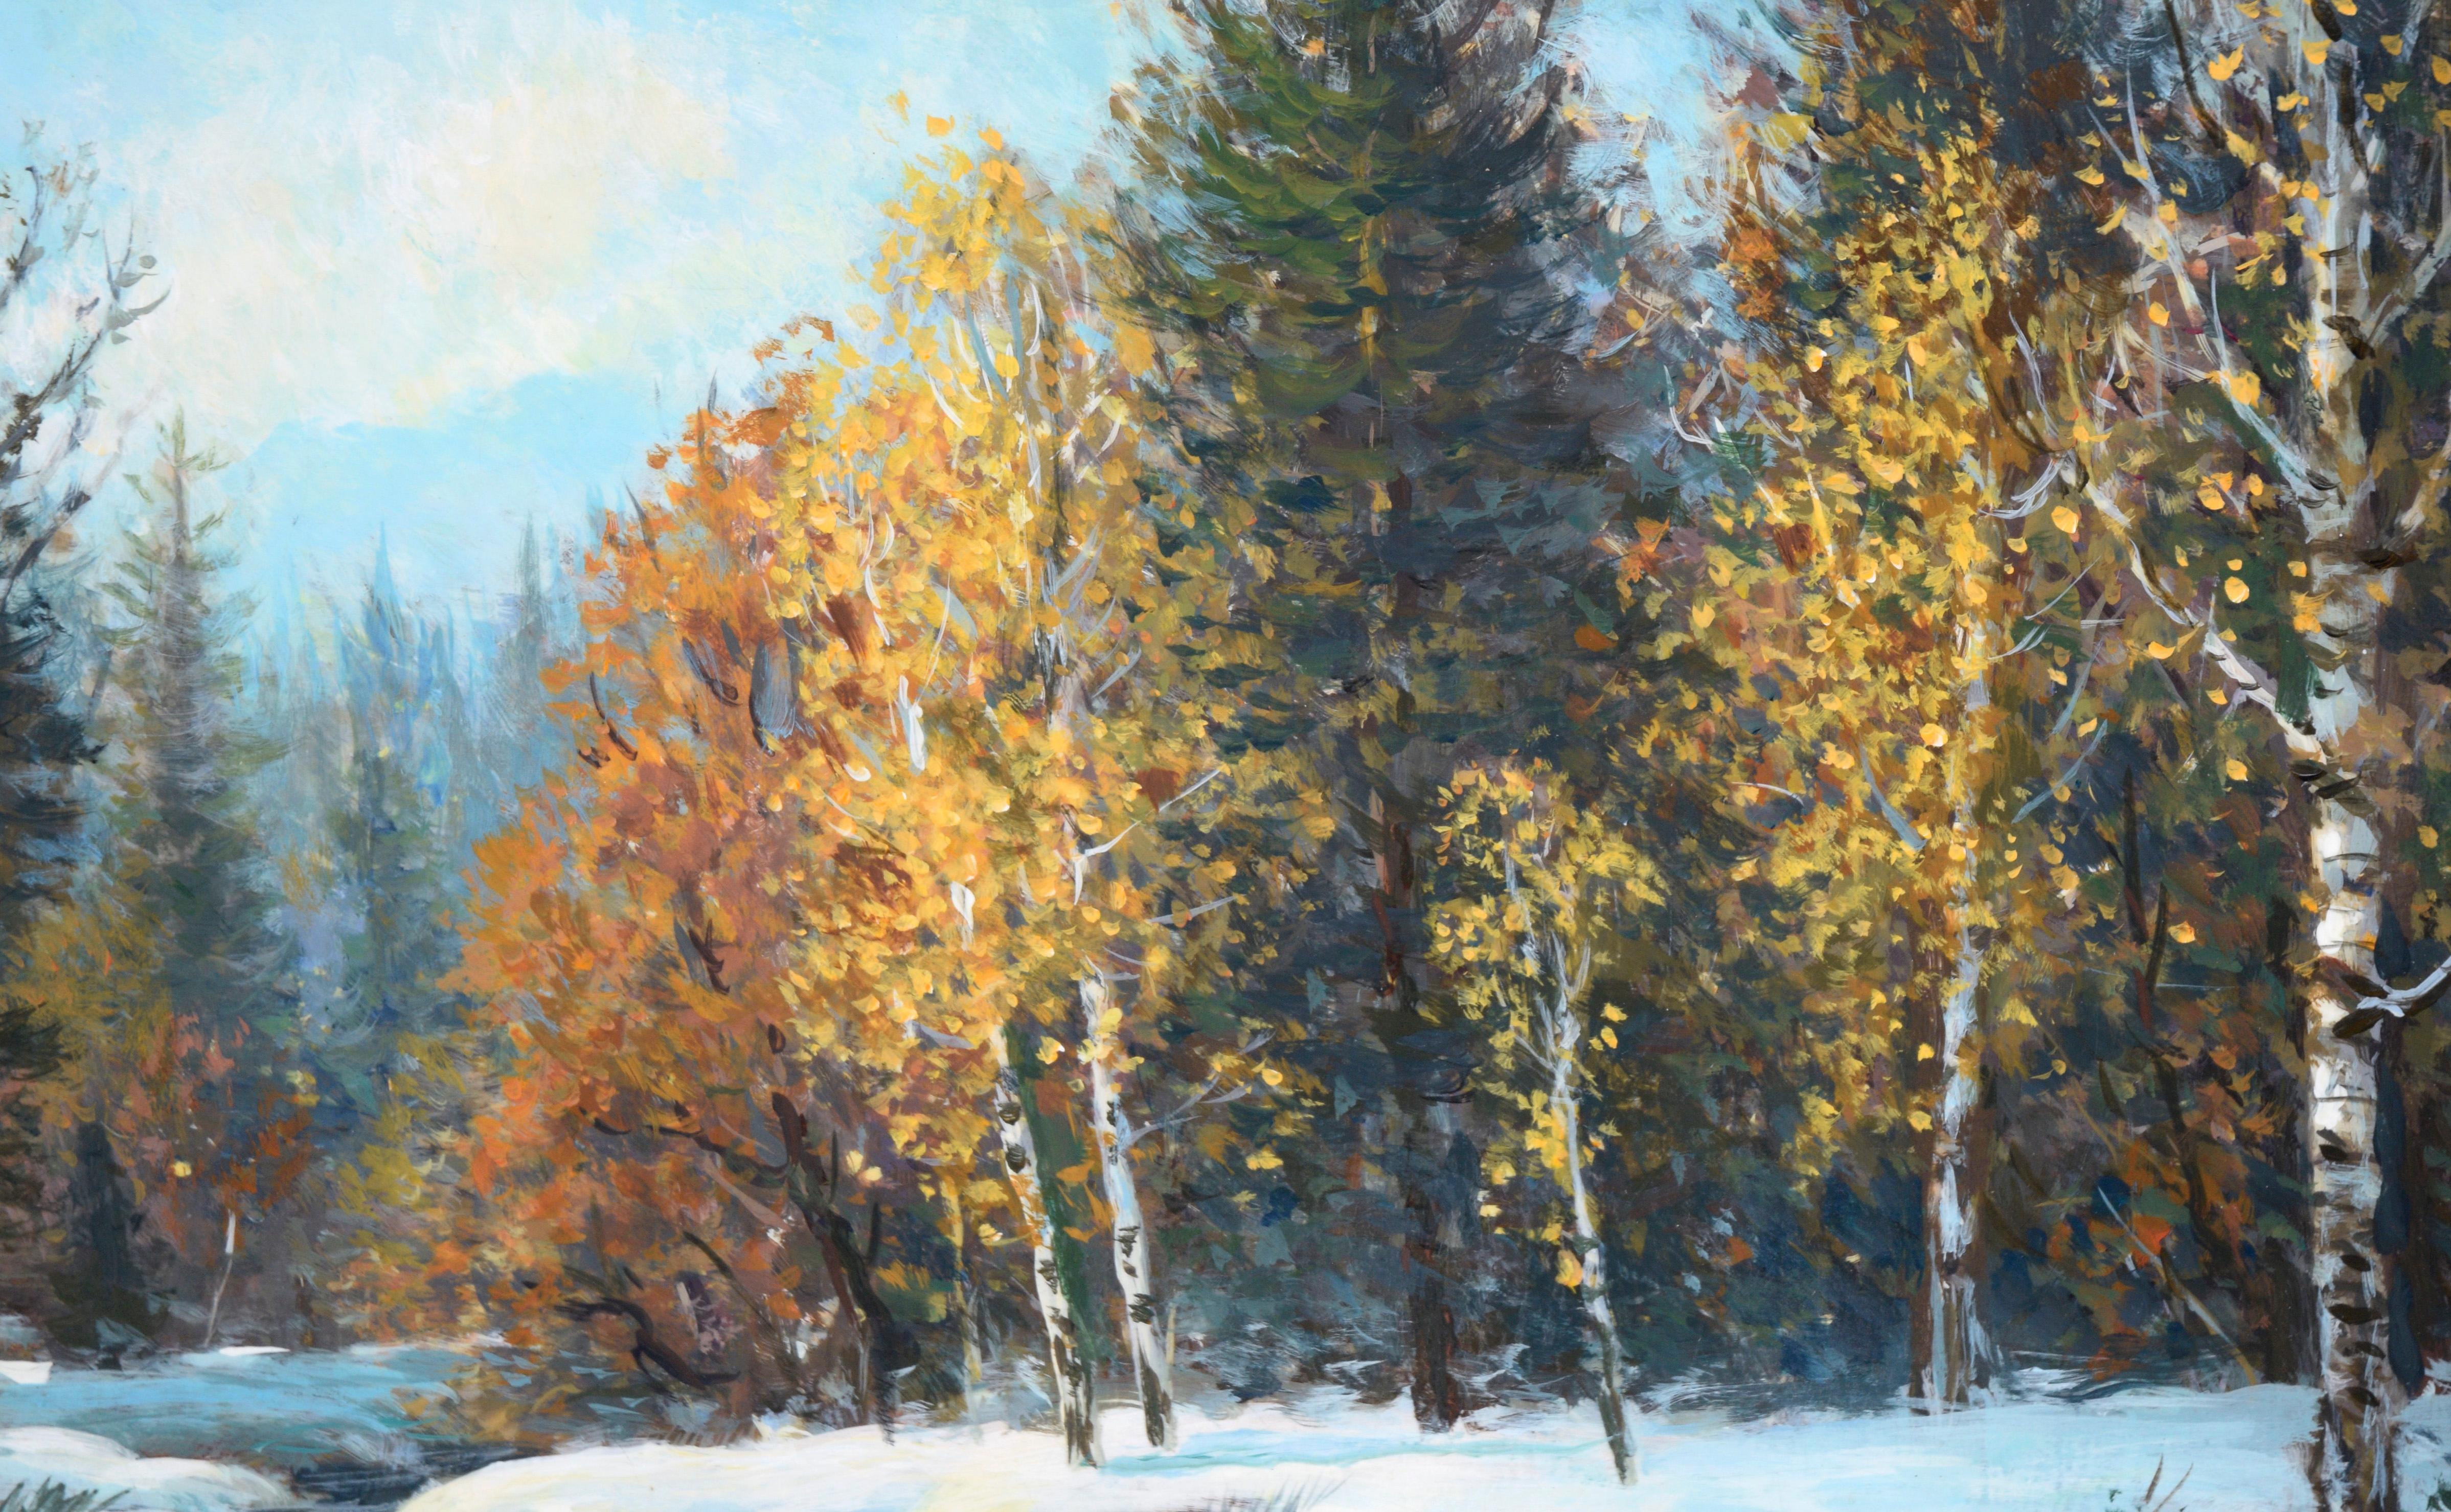 Snowy Creek in Hope Valley - Landscape in Oil on Masonite

Detailed winter scene by American artist Dean Packer (b. 1933). Light shines down on the snowy banks of a creek. The water flows through a forest with birch and evergreen trees. In the